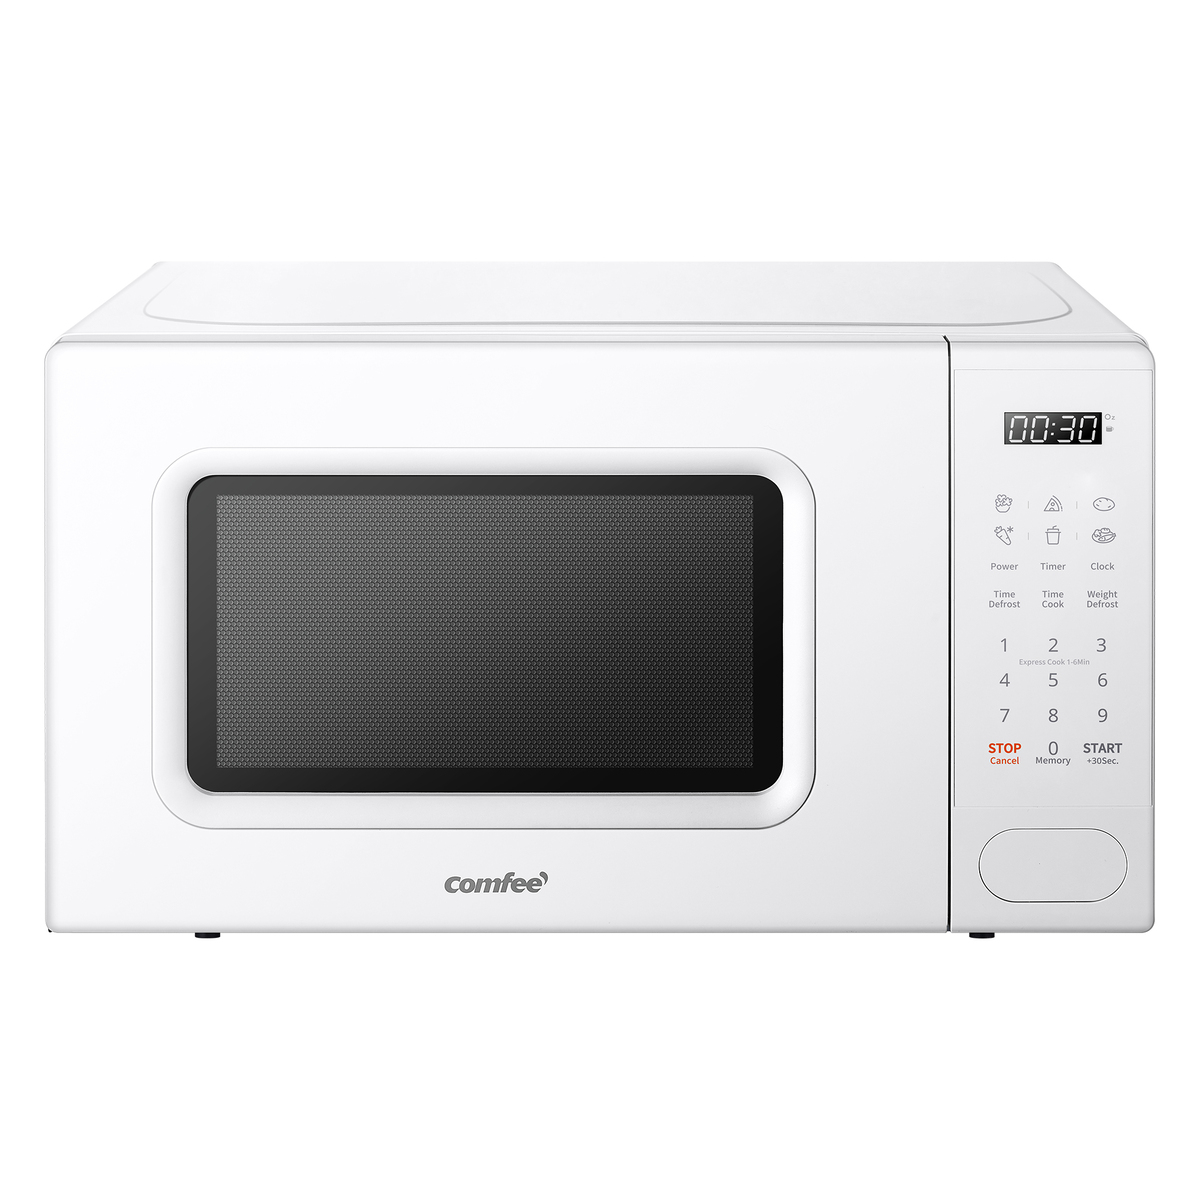 Comfee Microwave Oven CMWO720DSWH 20 ltr